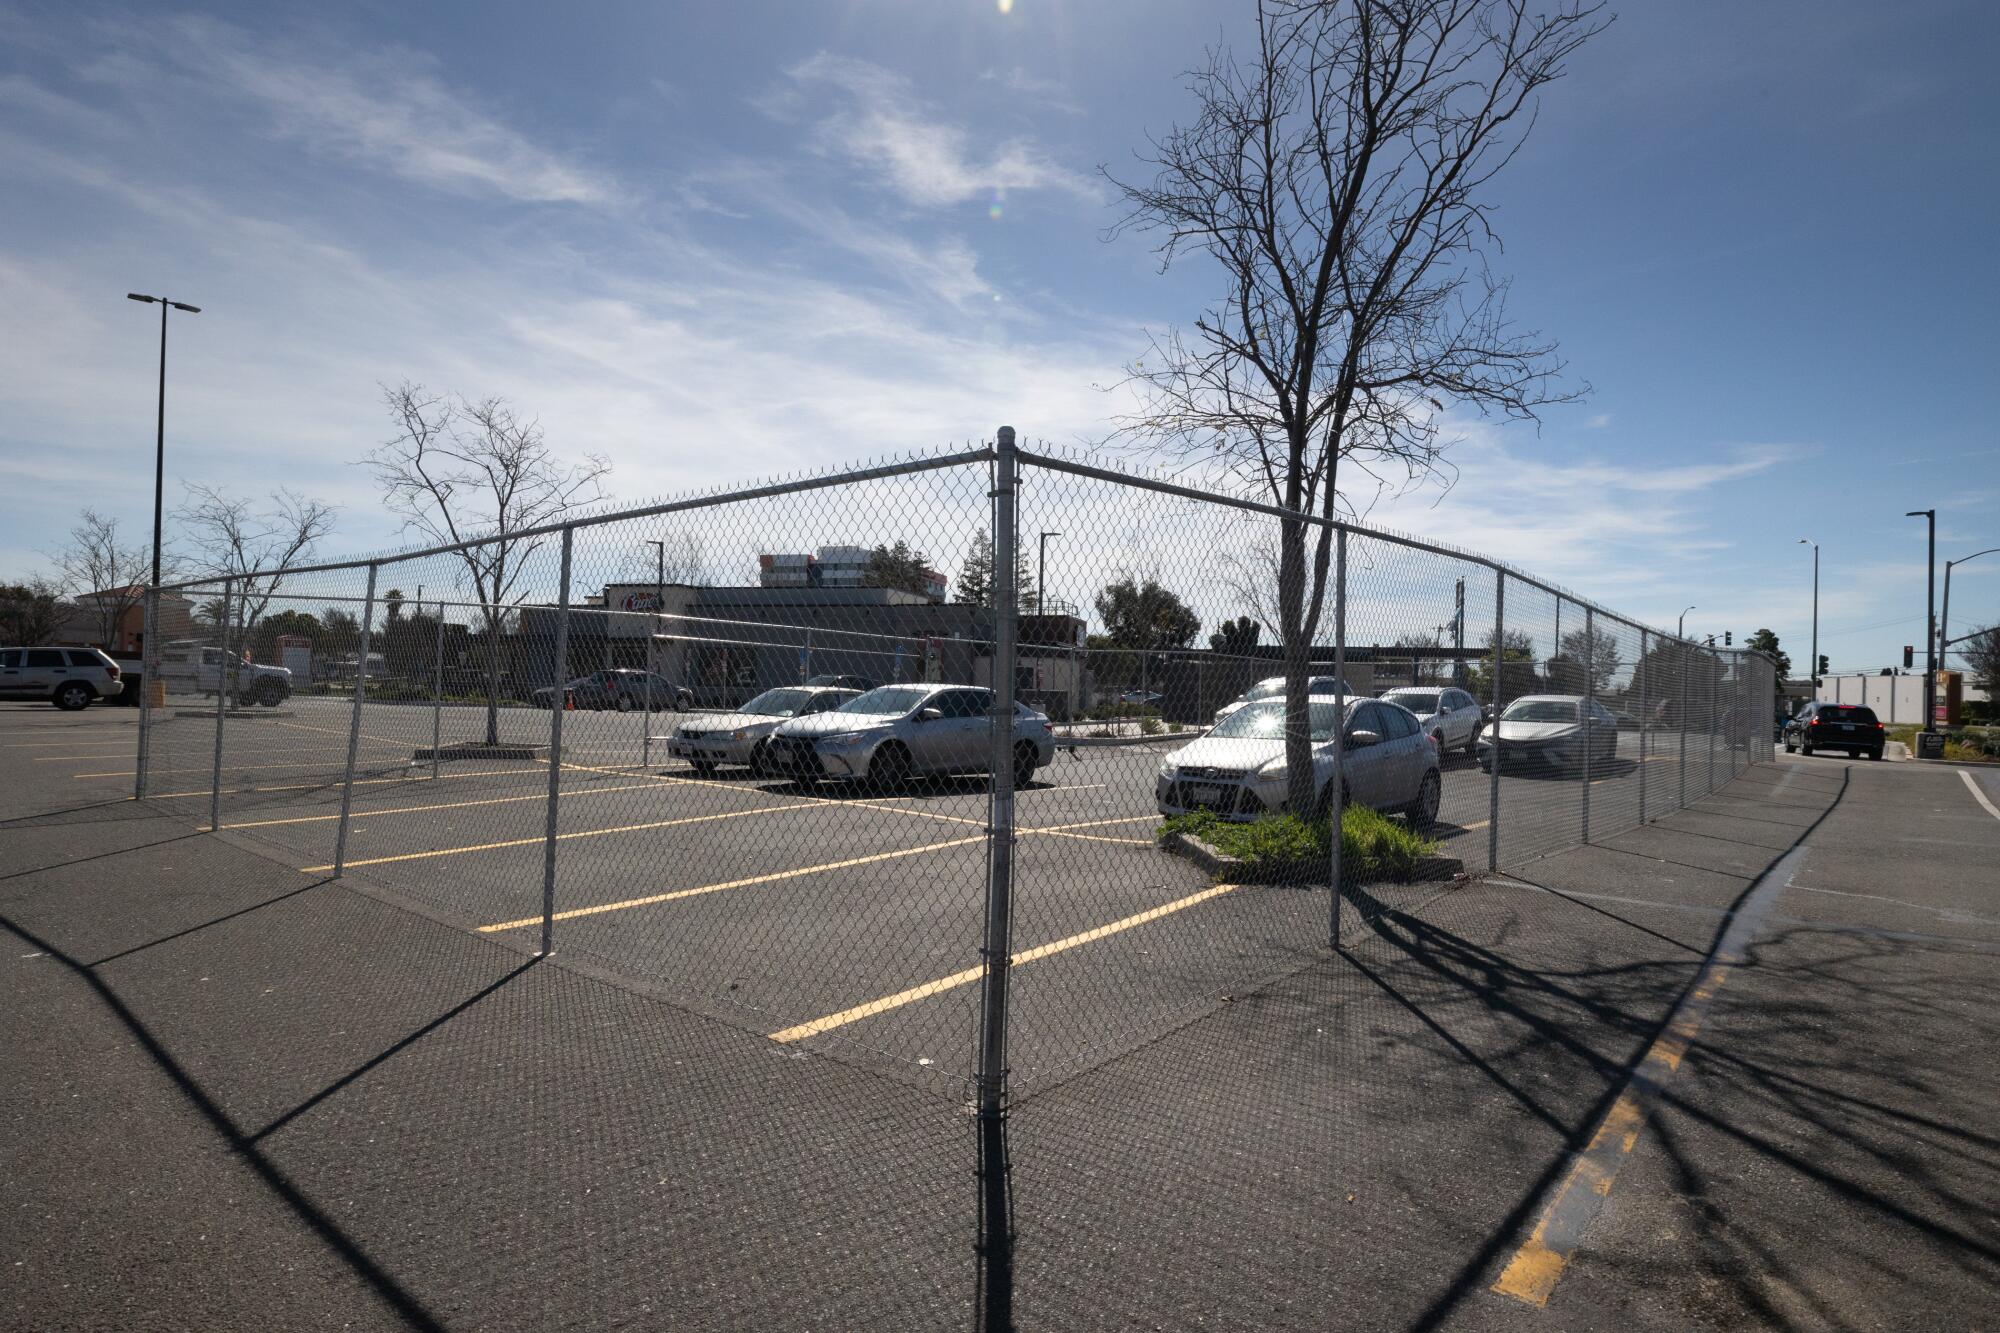 Tall chain-link fencing surrounds part of a parking lot with several cars and additional empty parking spaces.